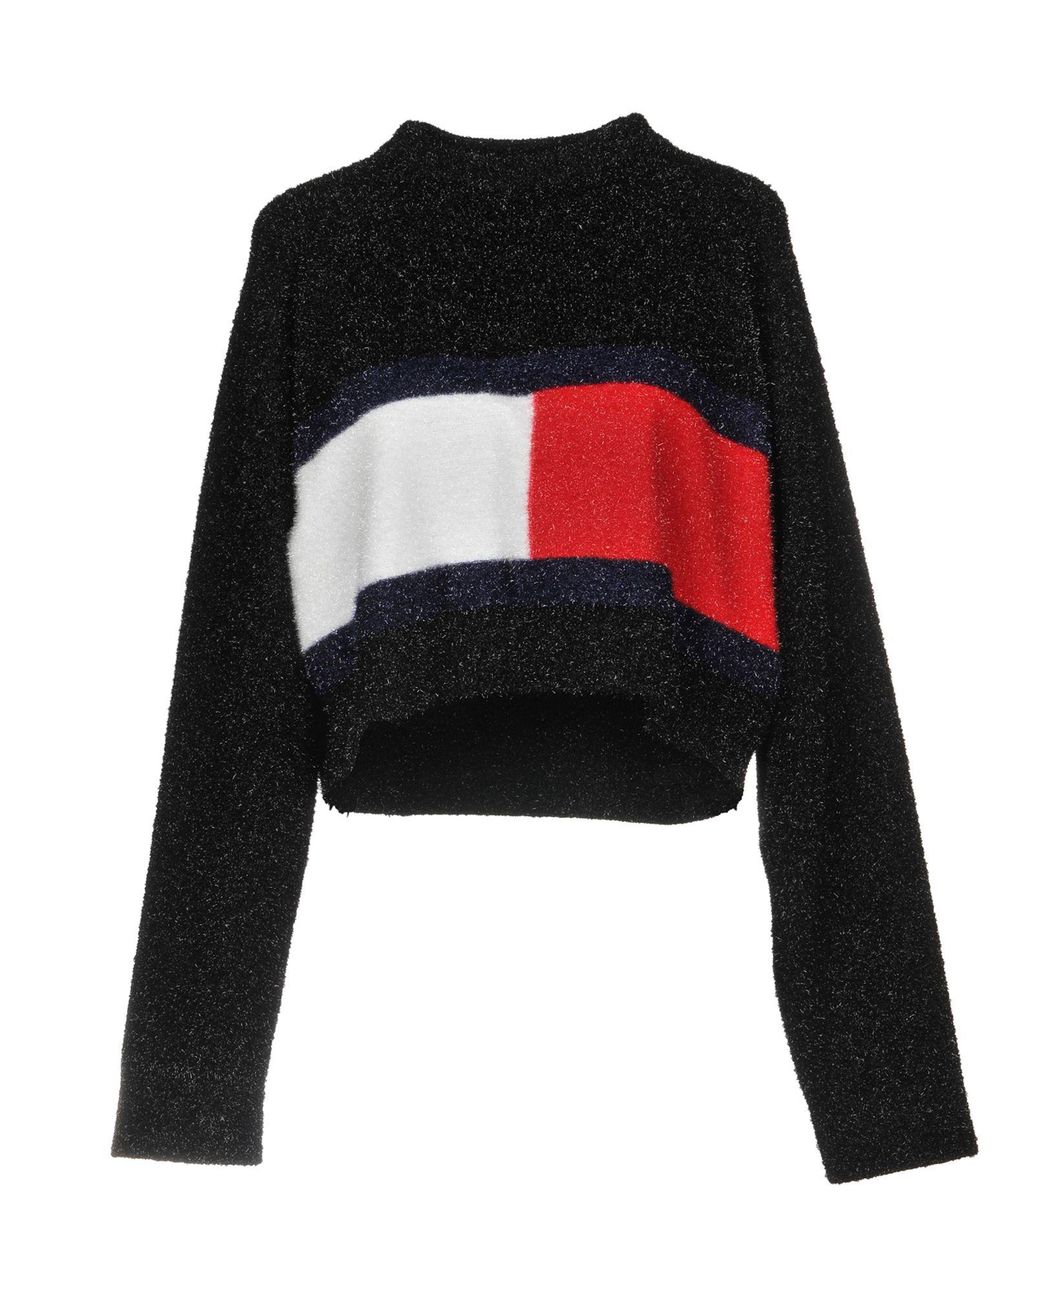 Tommy Hilfiger Synthetic Jumper in Black - Lyst